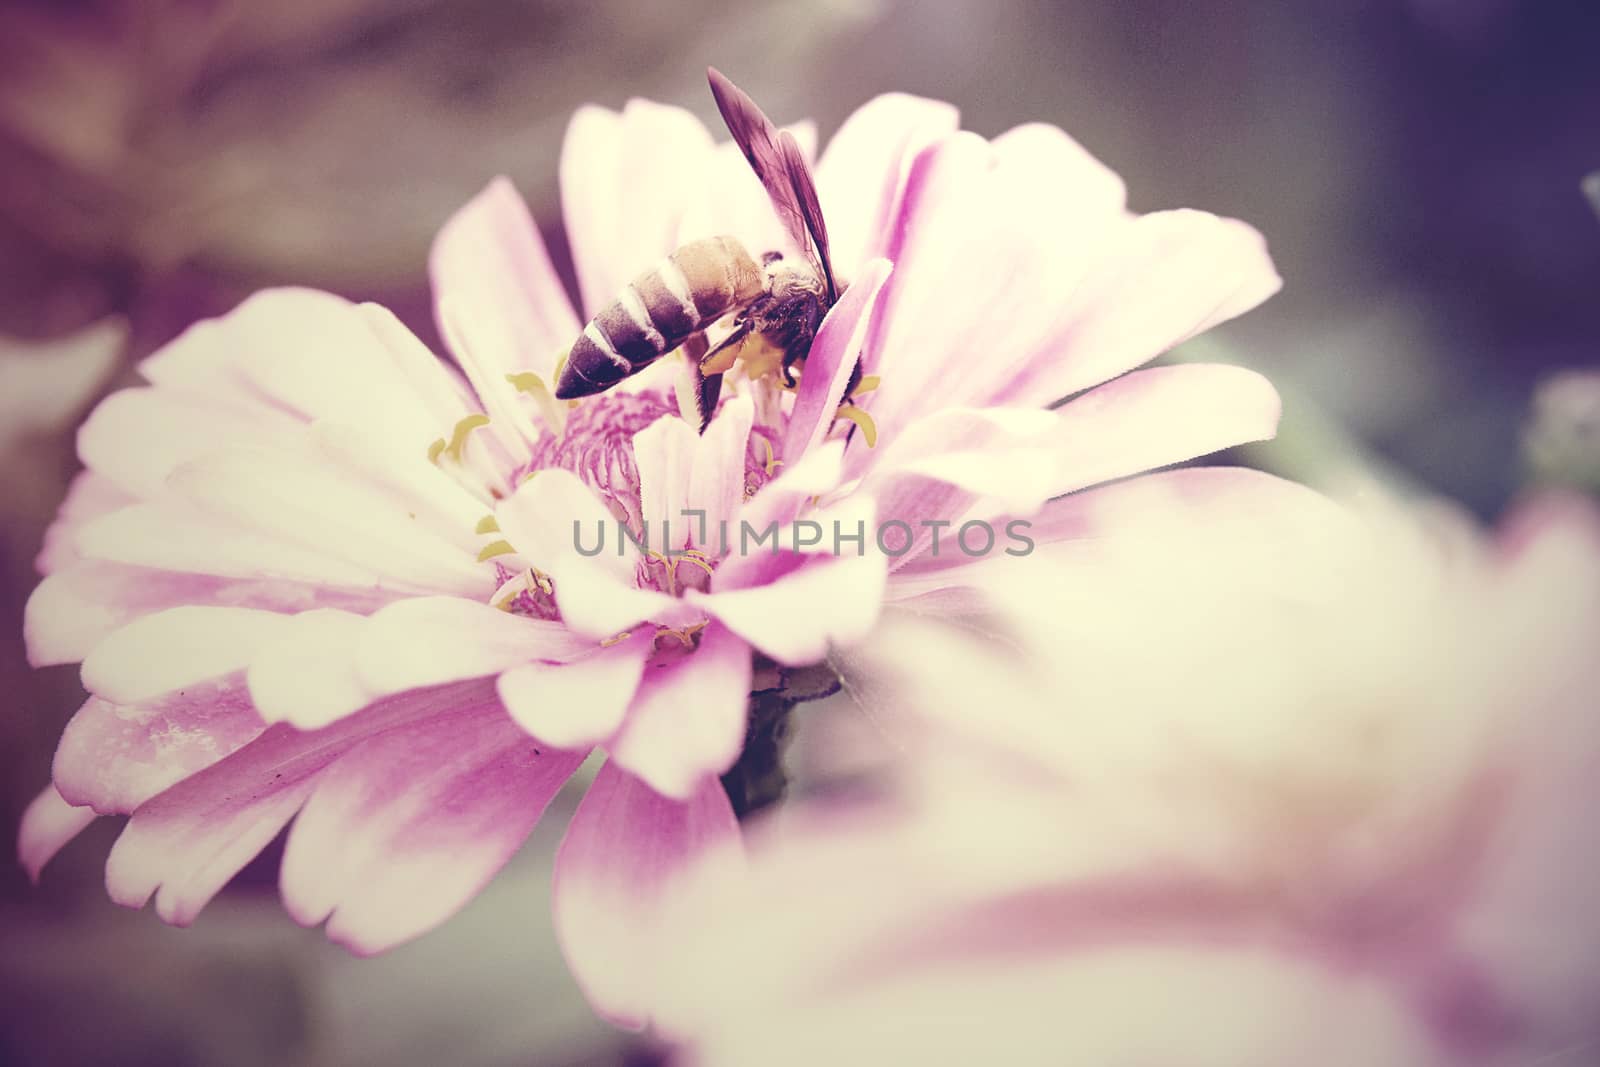 Vintage tone of Hover flies on pink Zinnia